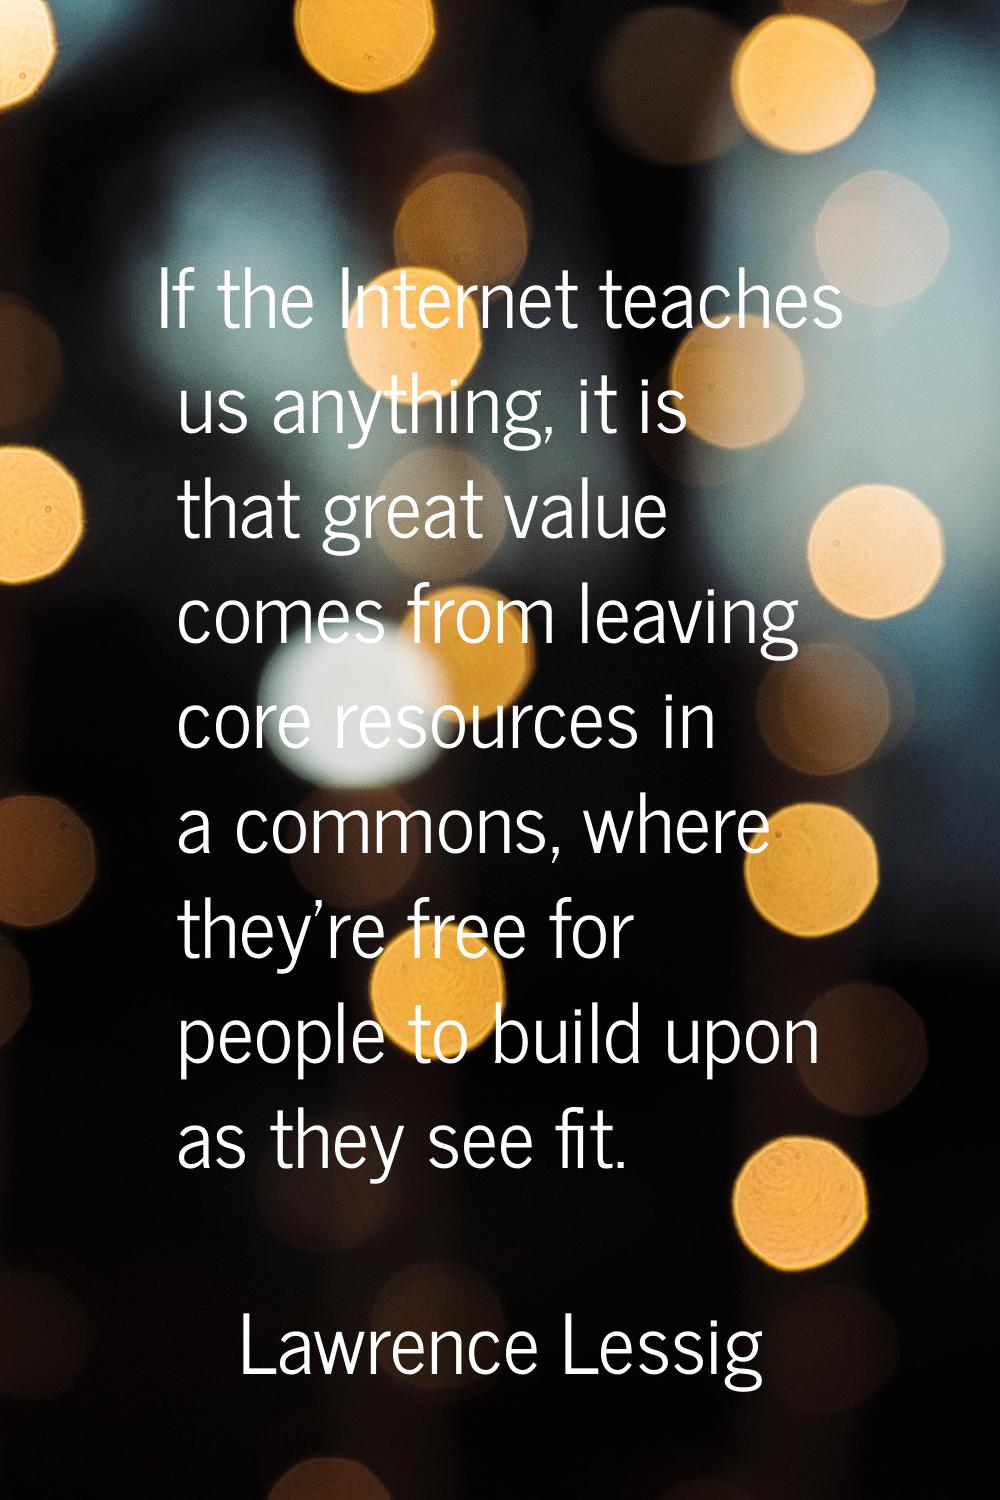 If the Internet teaches us anything, it is that great value comes from leaving core resources in a 